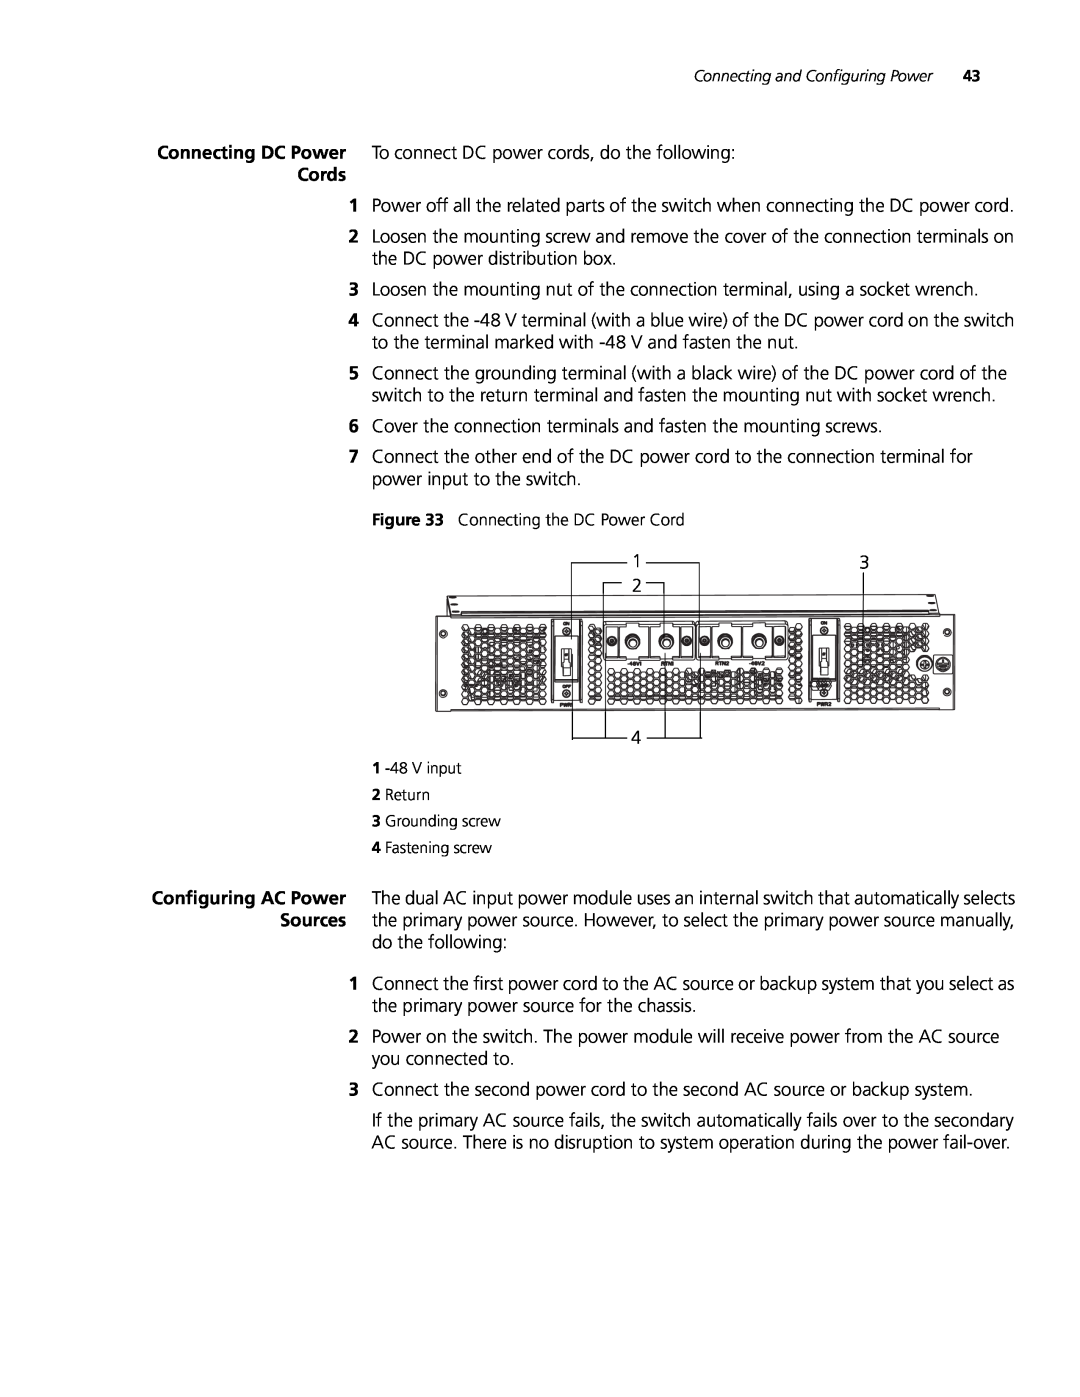 3Com 3C16897 8-slot DC Chassis manual Connecting DC Power To connect DC power cords, do the following, Cords 